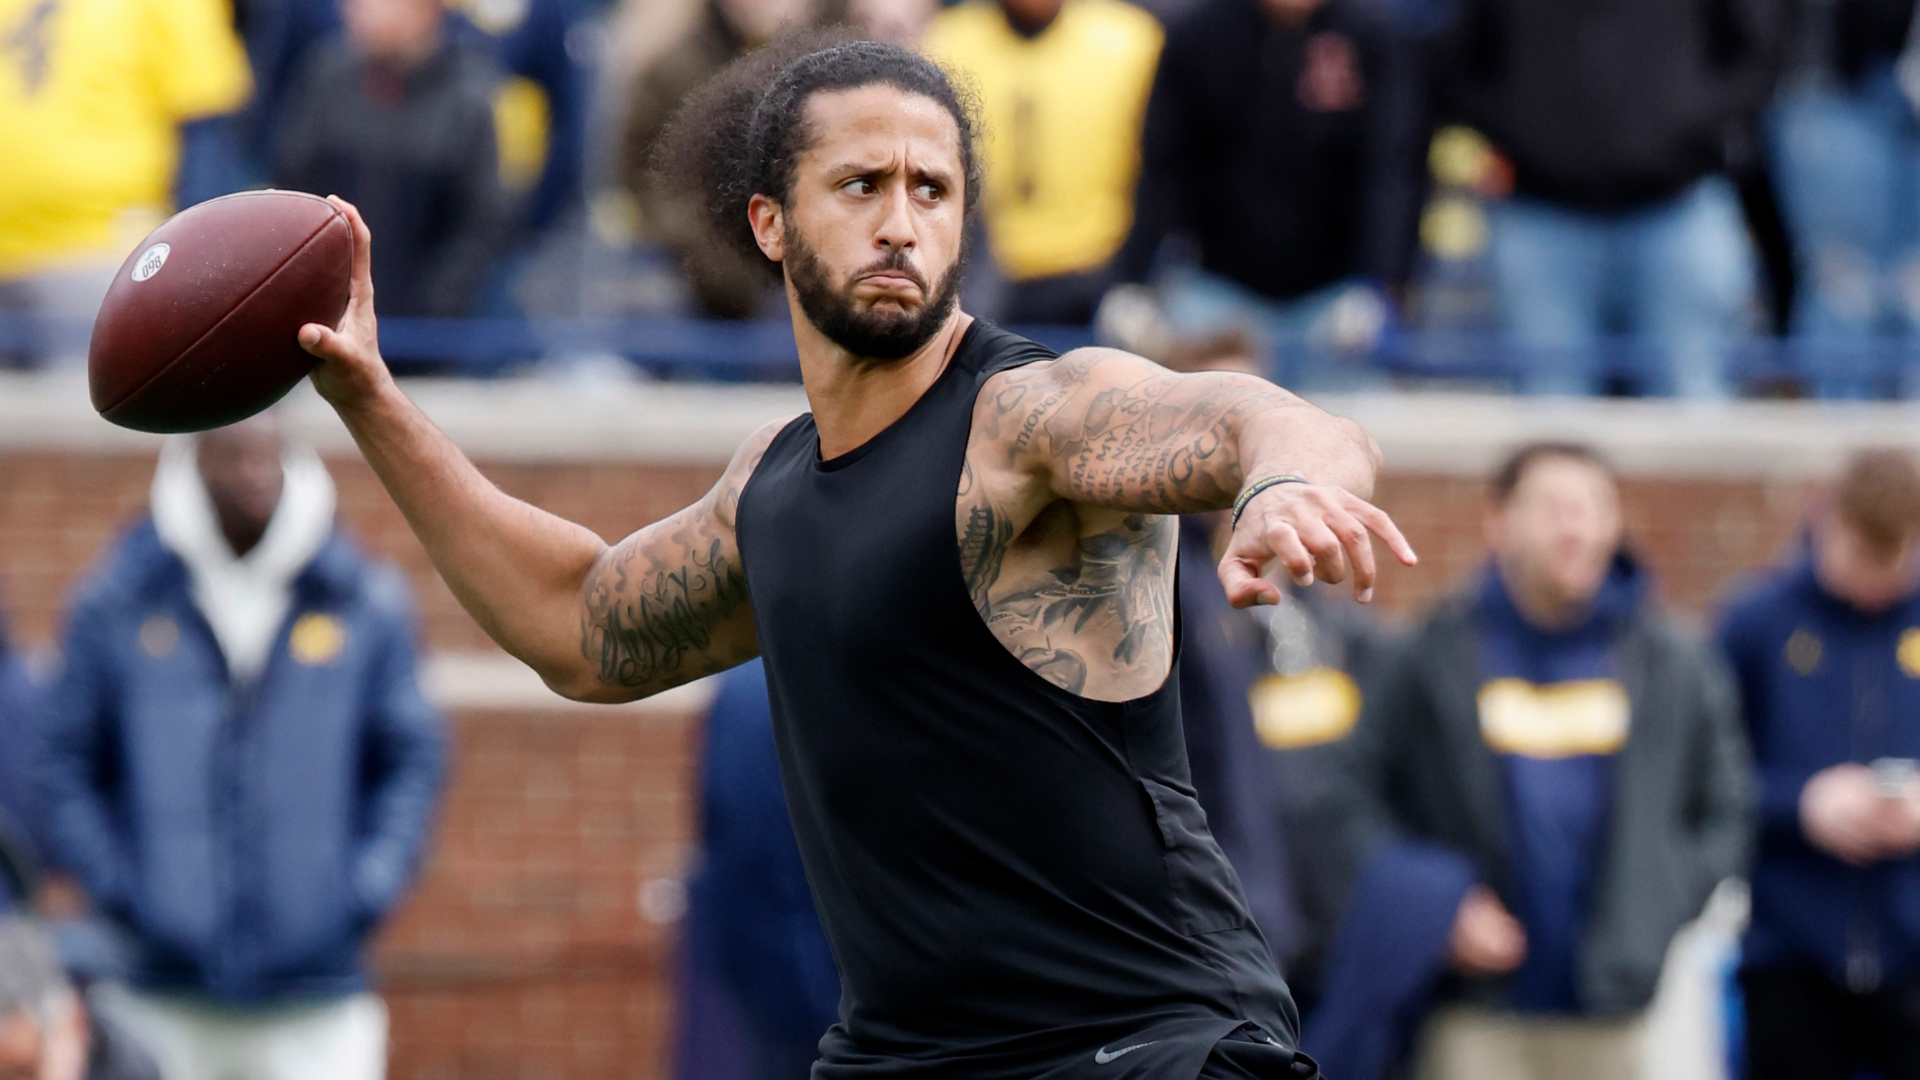 Jets Rumors: Colin Kaepernick Reaches Out After Aaron Rodgers Injury